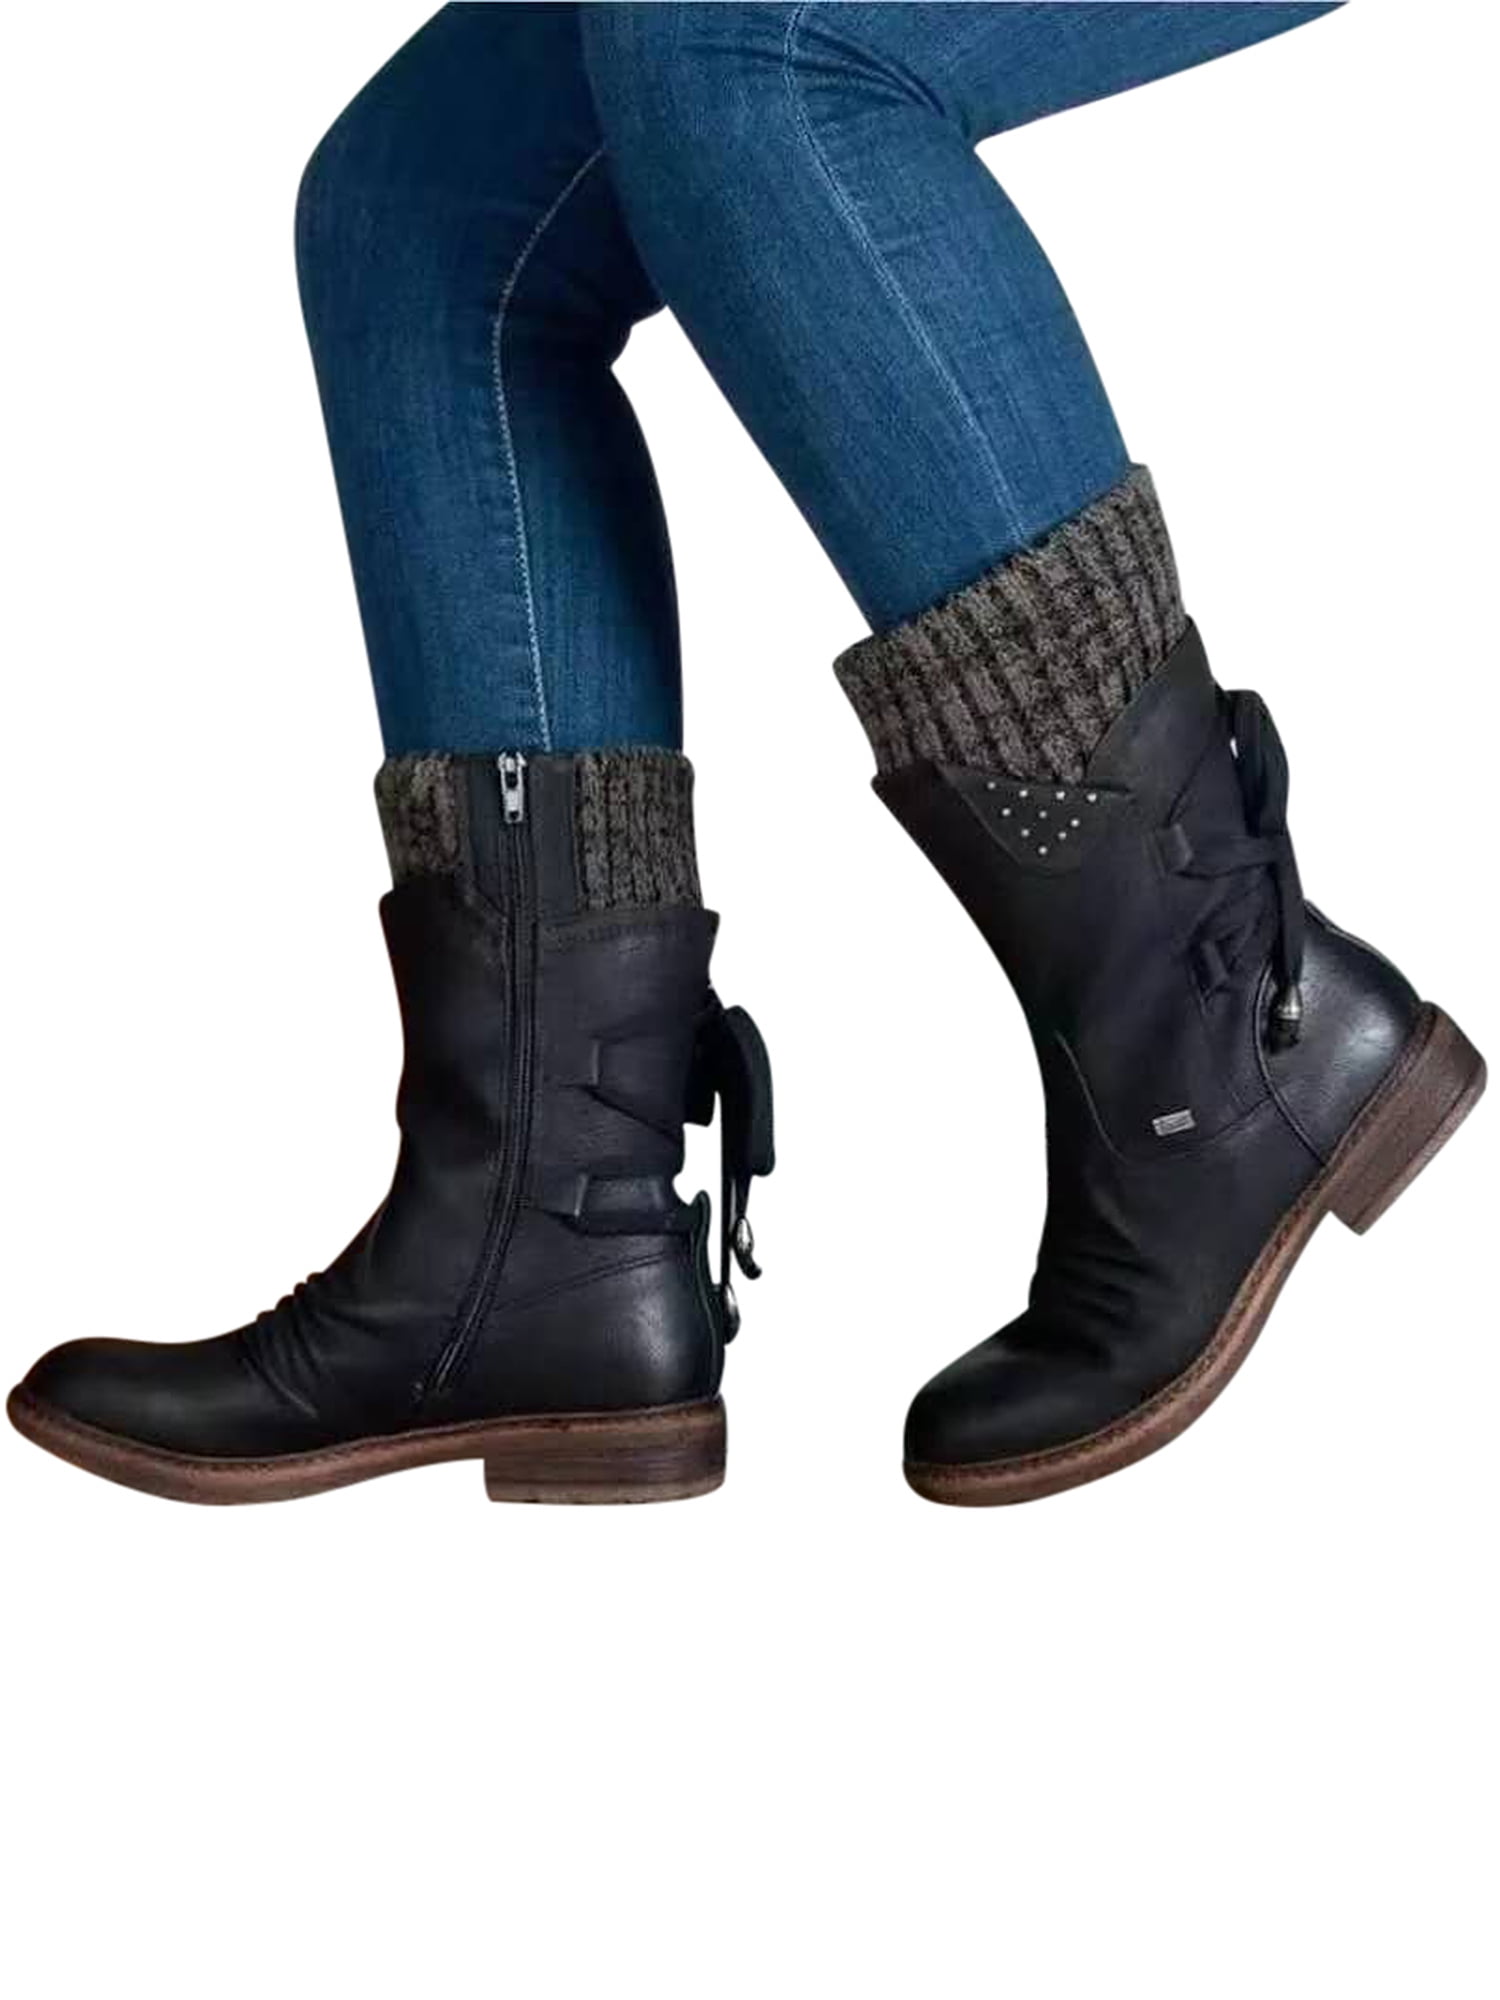 Details about   Hot Womens Snow Fur Furry Winter Warm Ankle/Mid calf Boots Casual Shoes Size New